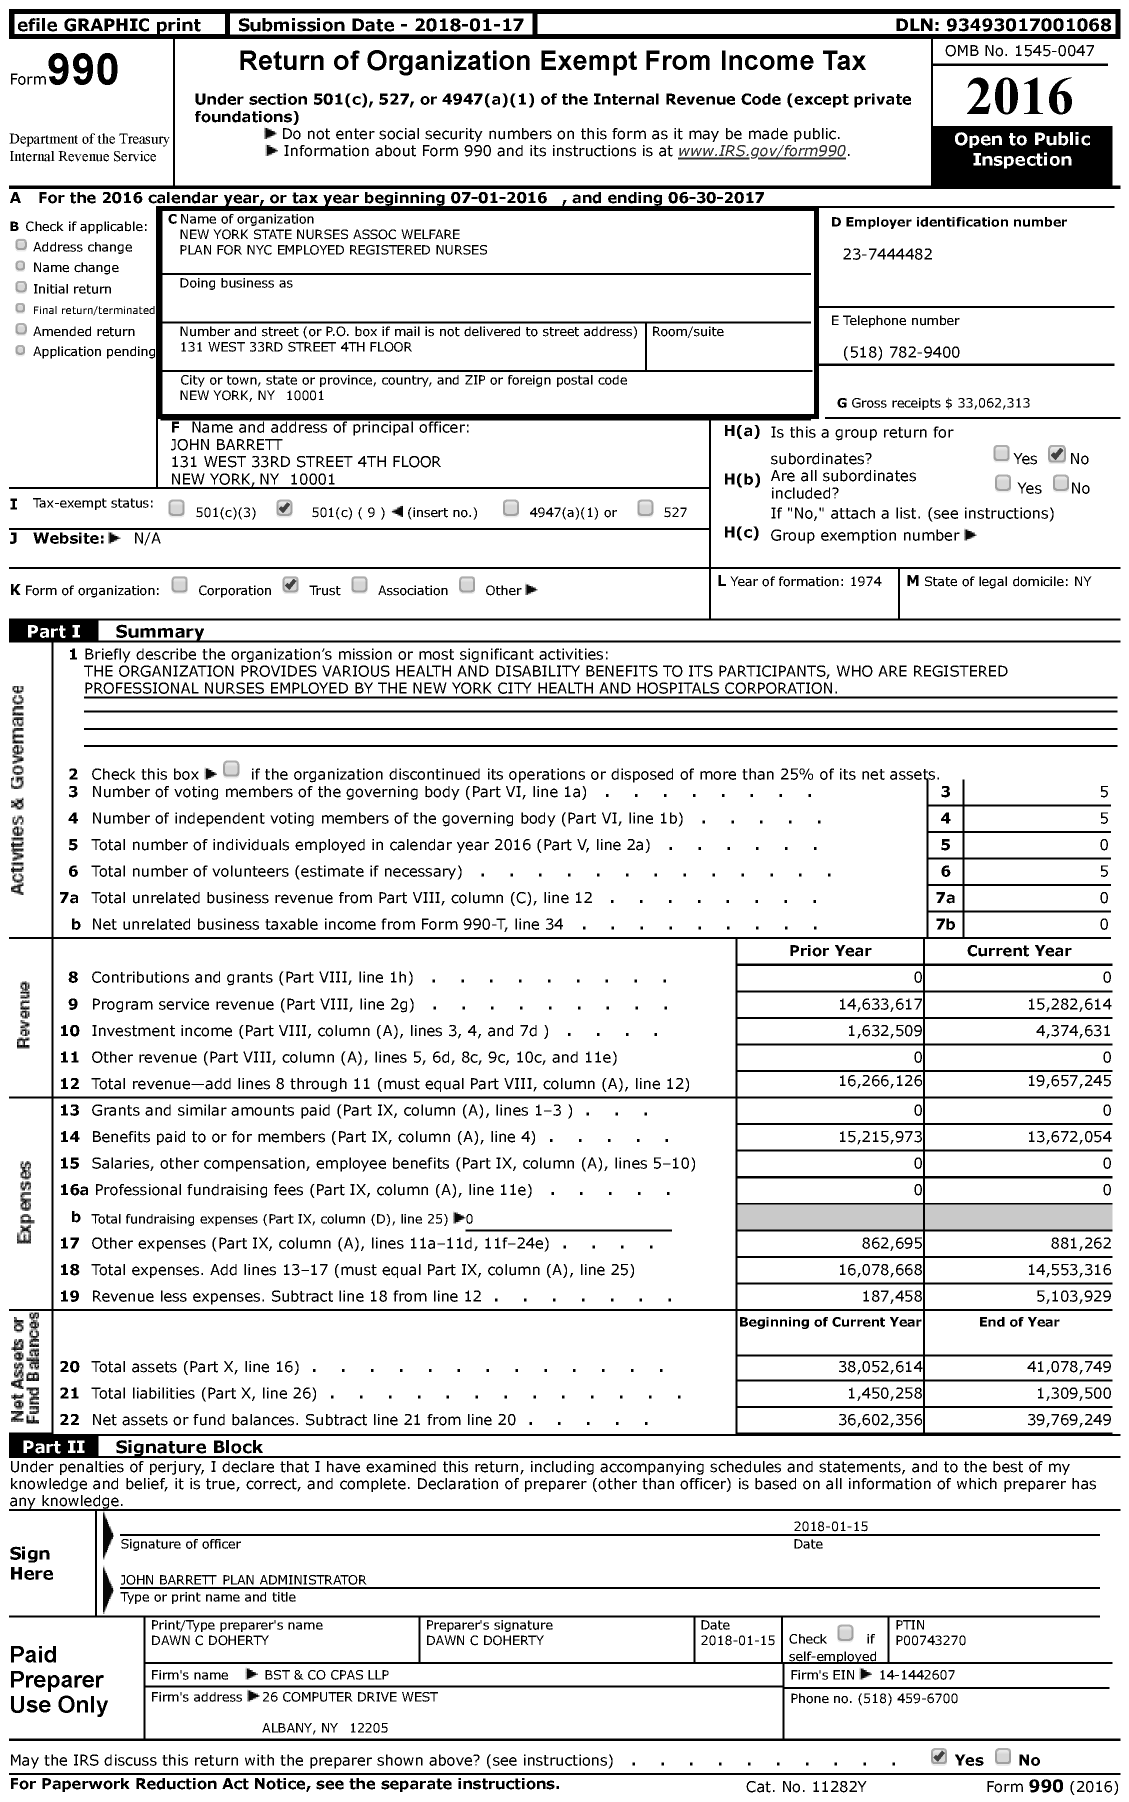 Image of first page of 2016 Form 990 for New York State Nurses Association Welfare Plan for Nyc Employed Registered Nurses